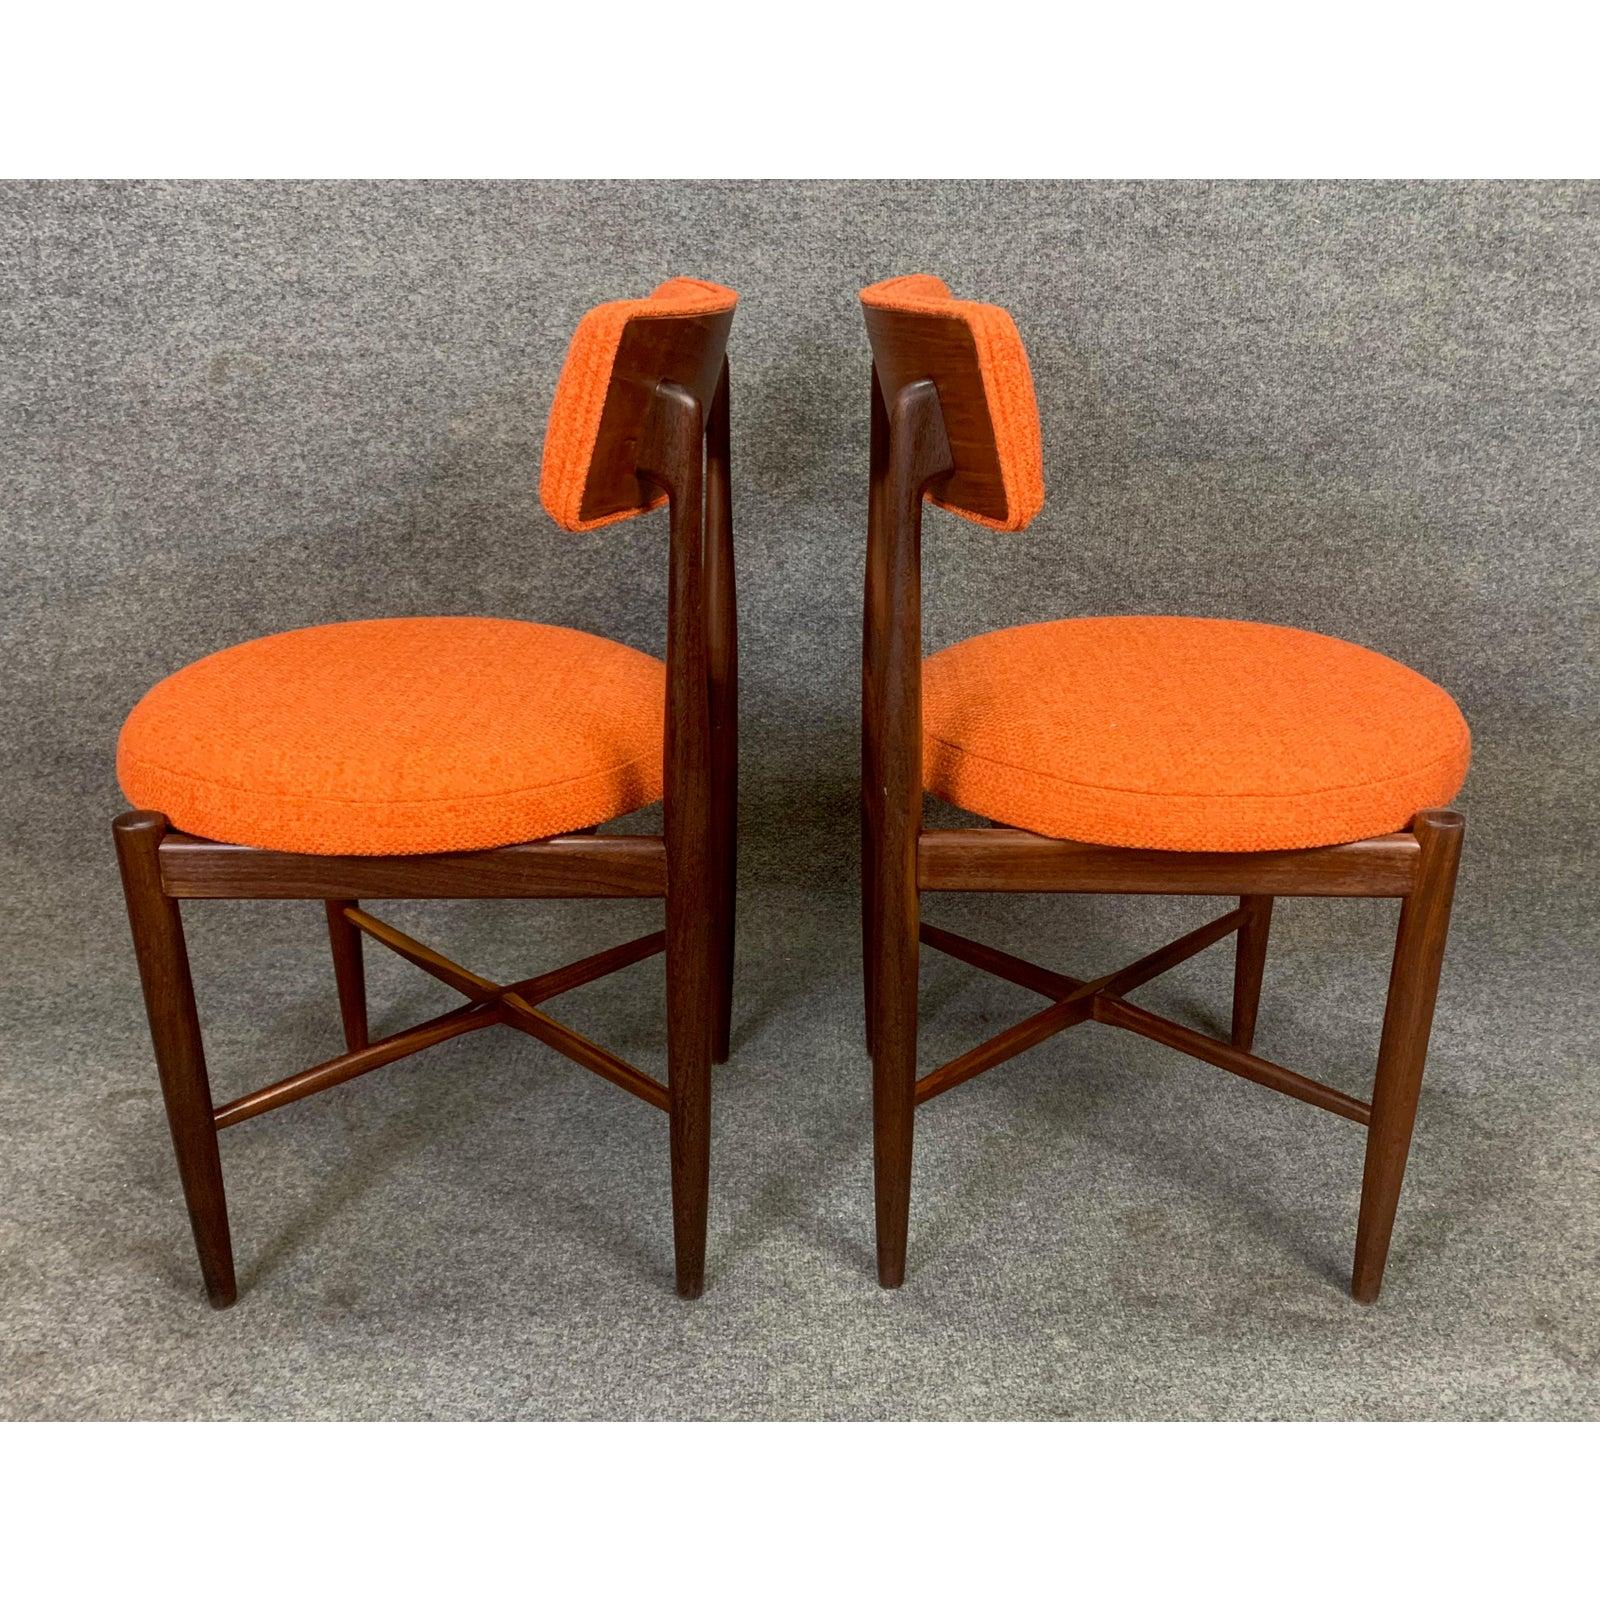 Mid-20th Century Pair of Vintage British Mid-Century Modern Teak Accent Chairs by G Plan For Sale